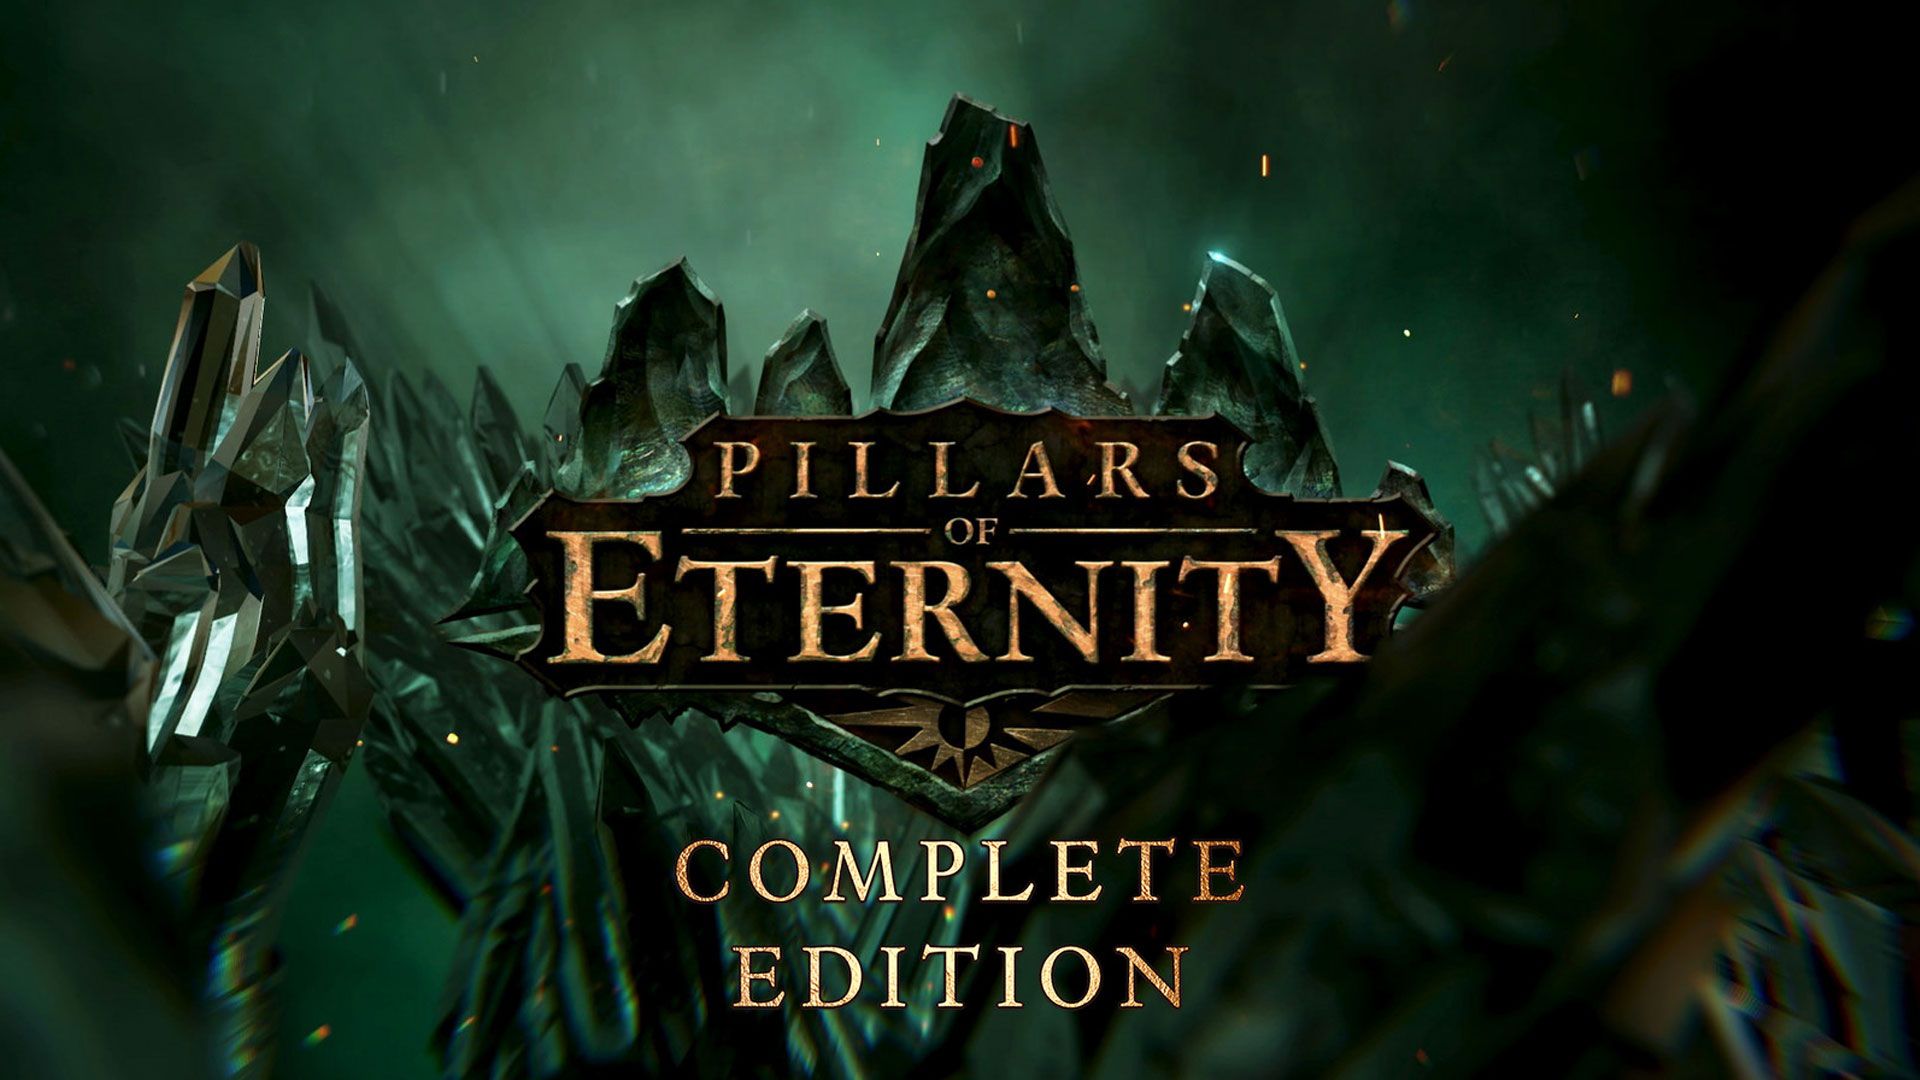 Pillars of Eternity: Complete Edition Launches On Nintendo Switch August 8th